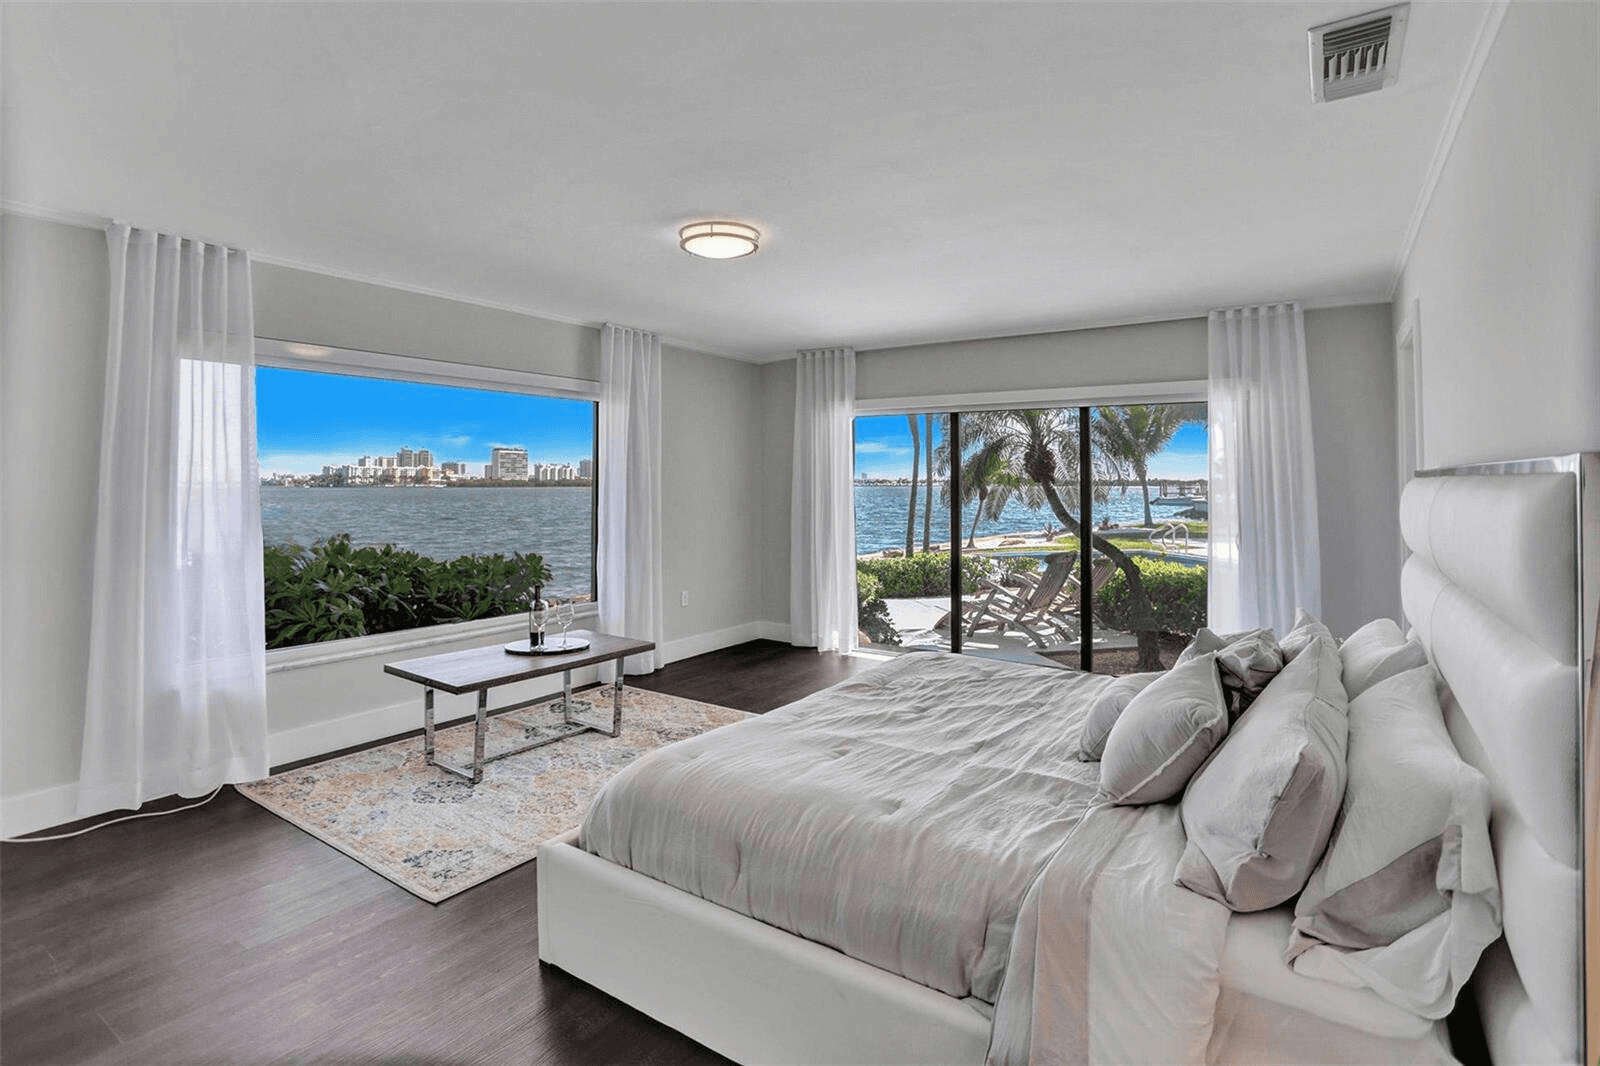 Breathtaking Biscayne Bay Panorama: Paradise Found in this Renovated Gem | 6 Beds | 5 Baths | 3446 sqft